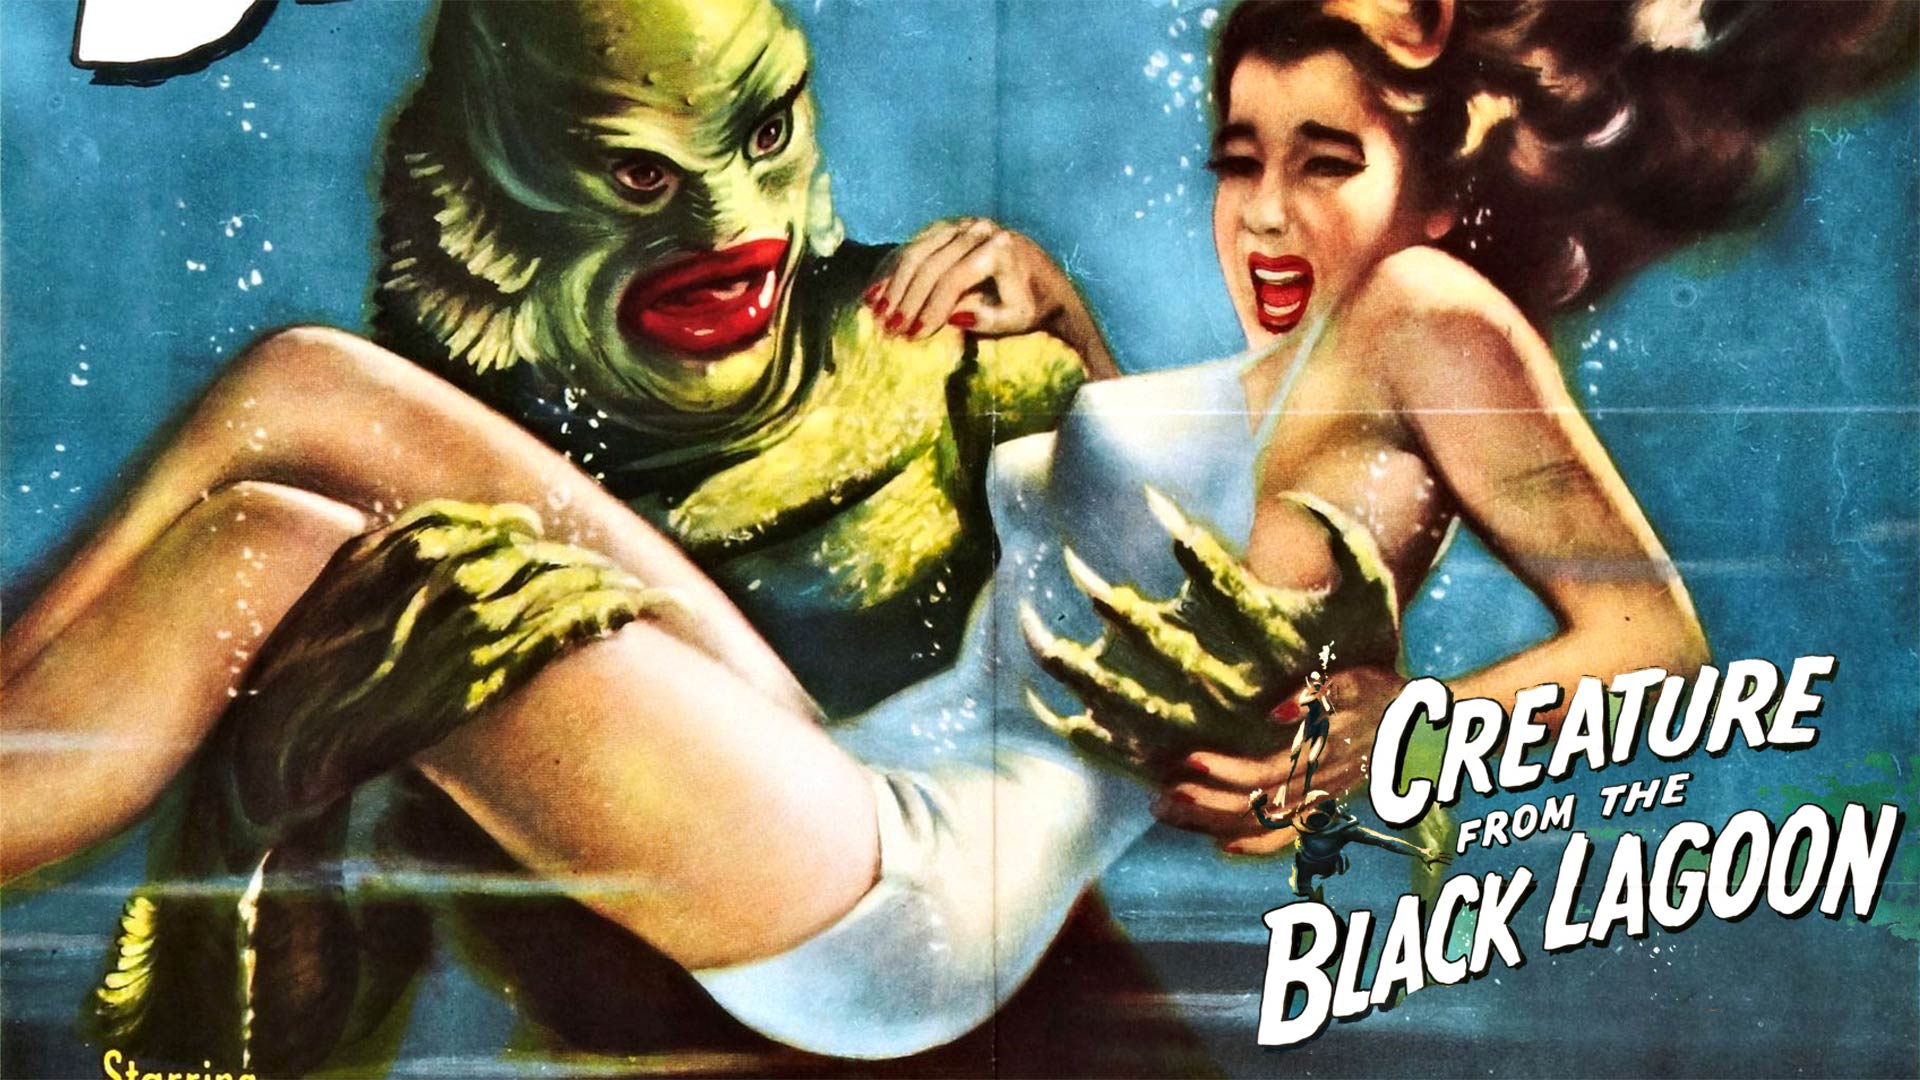 37-facts-about-the-movie-creature-from-the-black-lagoon